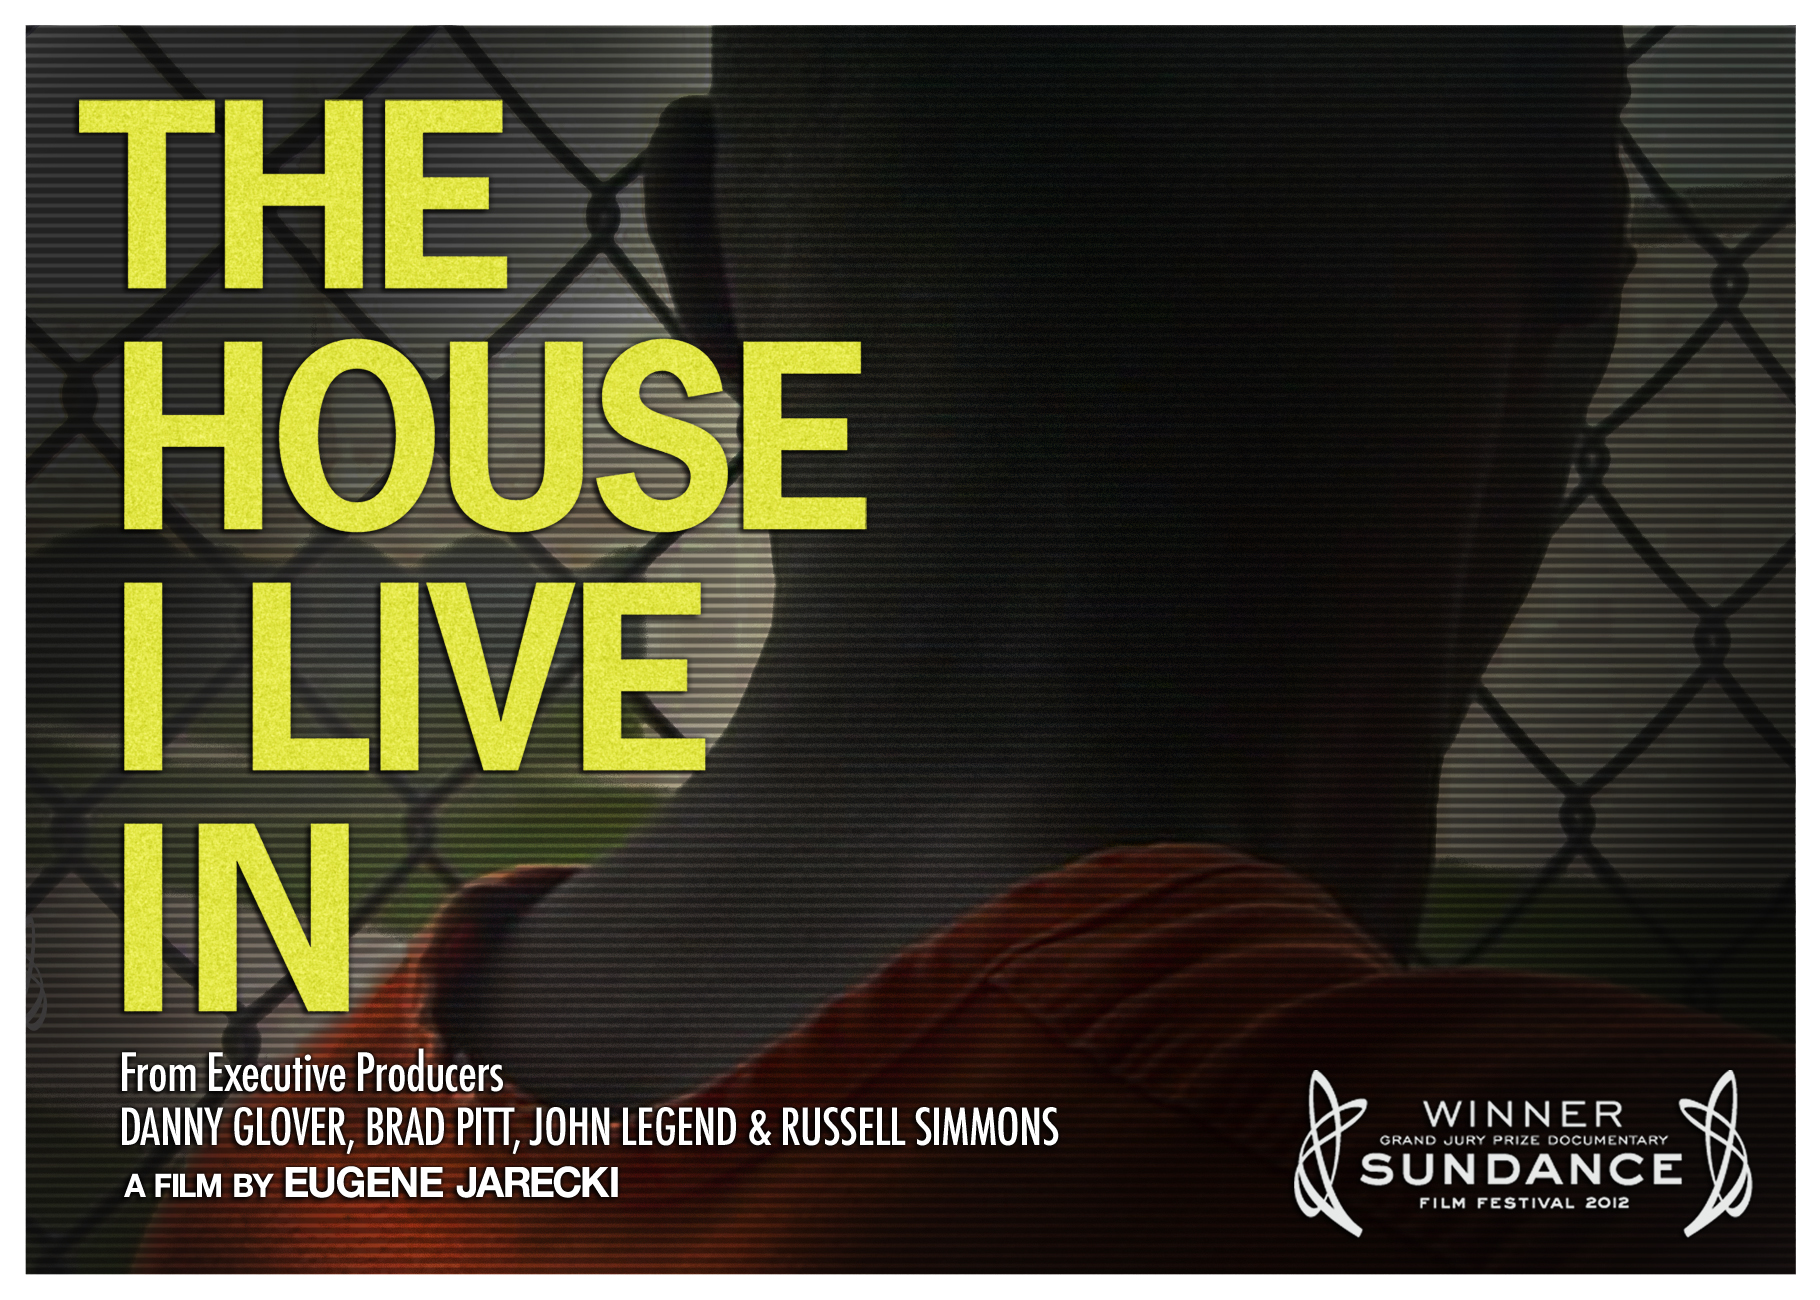 RSVP to "The House I Live In" at UALR